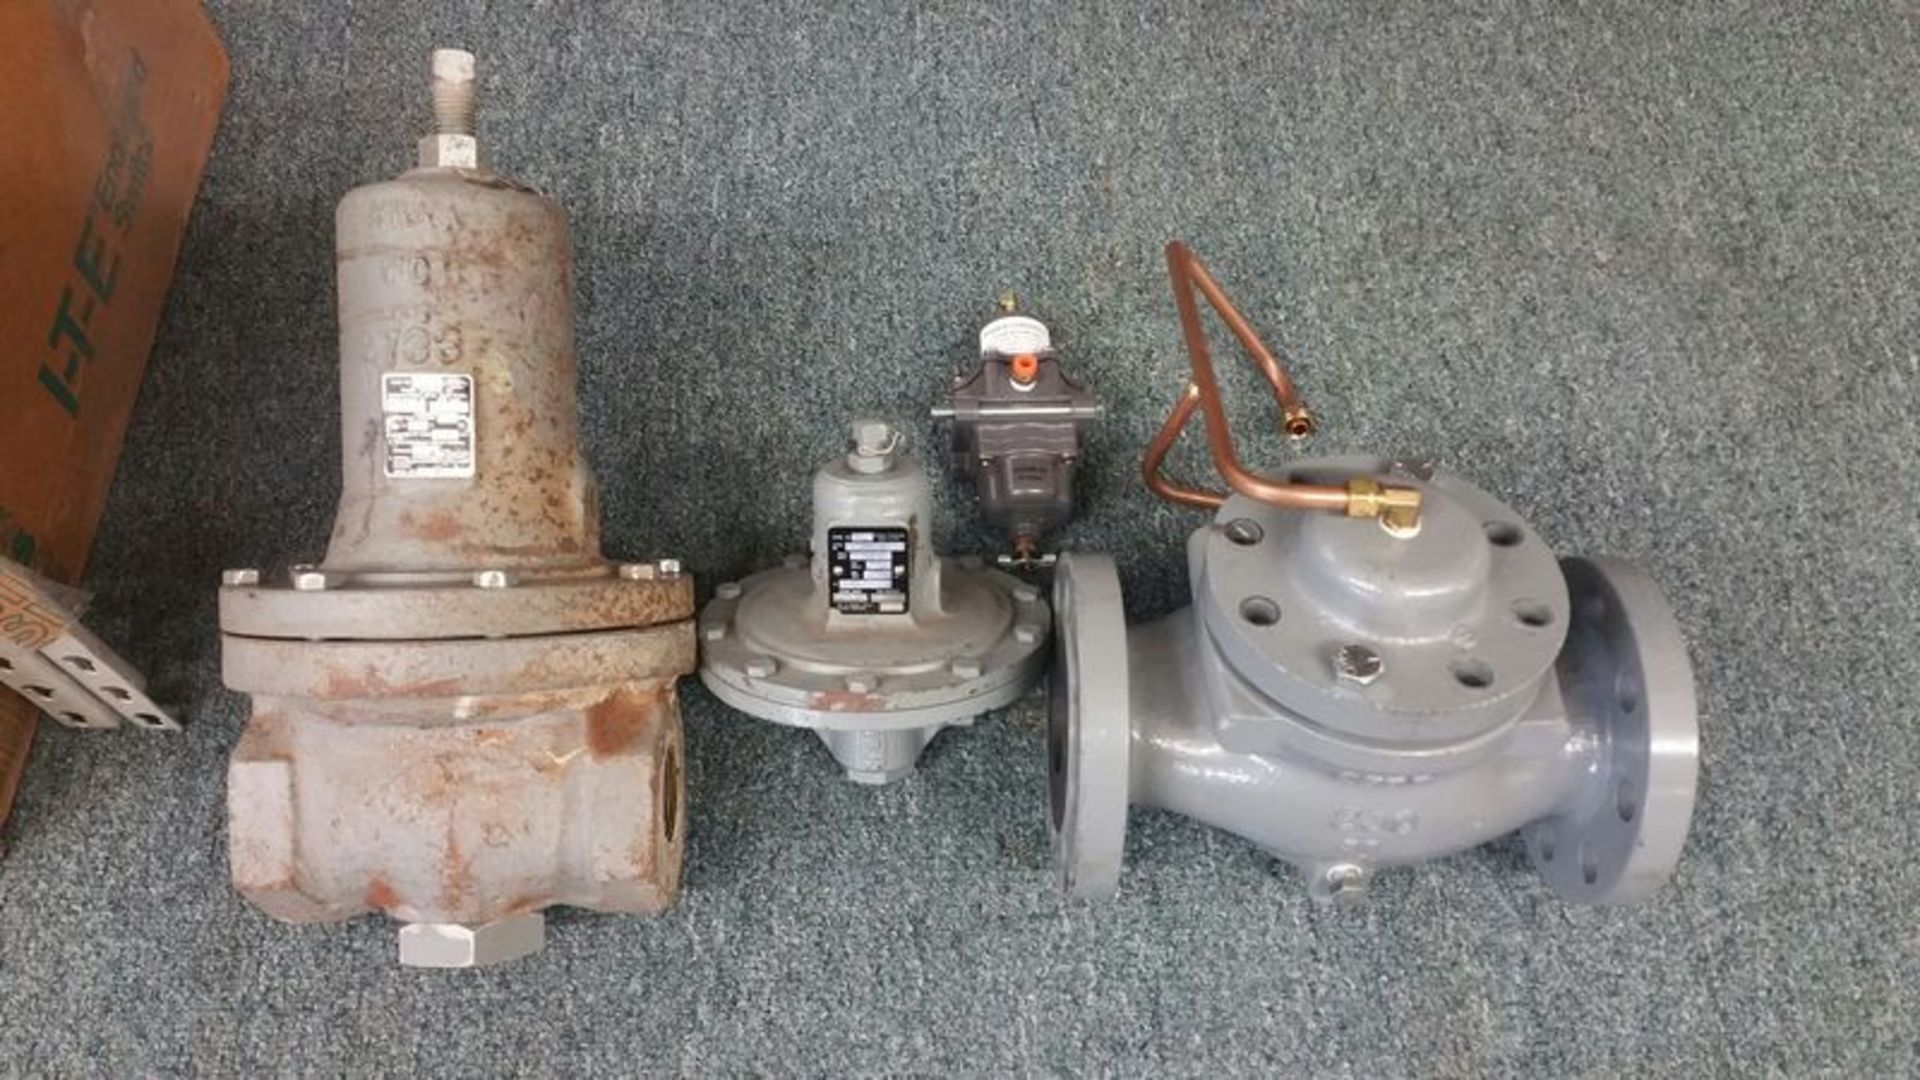 (4) Fisher Pressure Regulators Type 95H 1 3/4" Qty: 1 Type 92S 2" Body Only (Parts)Qty:1 Type 95L-